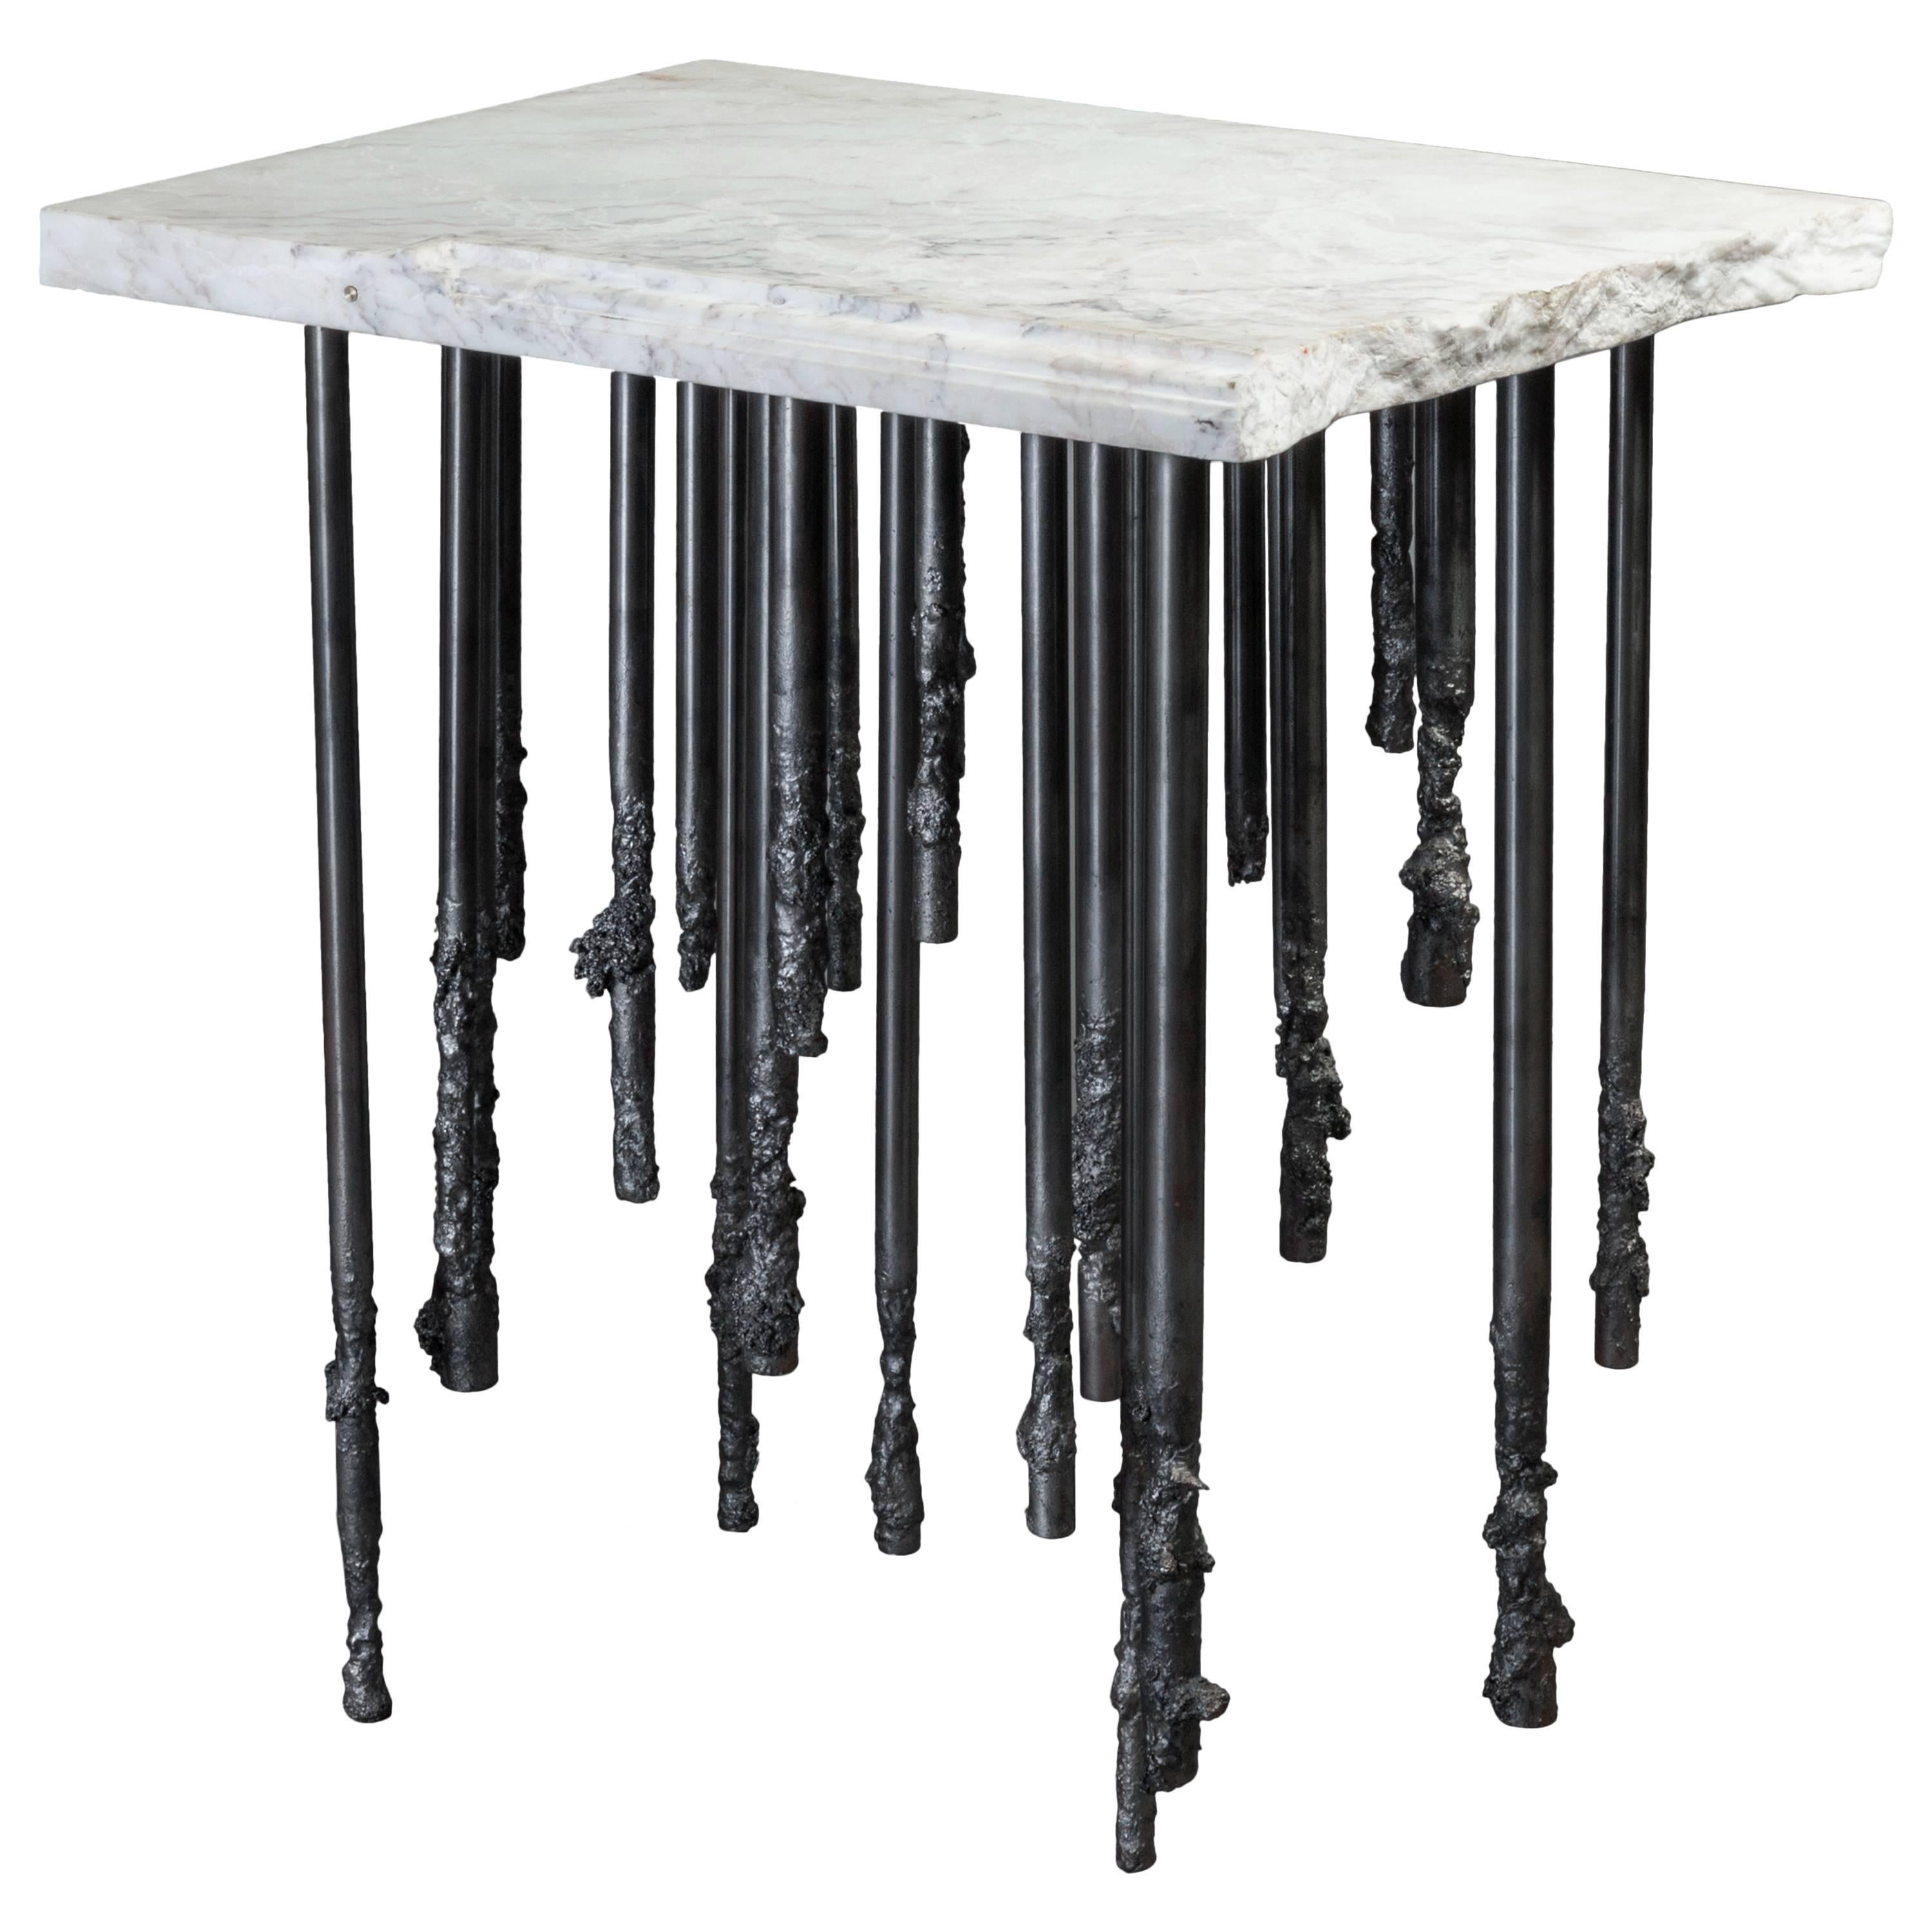 Hand Crafted One Of A Kind Sculptural White Marble and Iron Accent Table